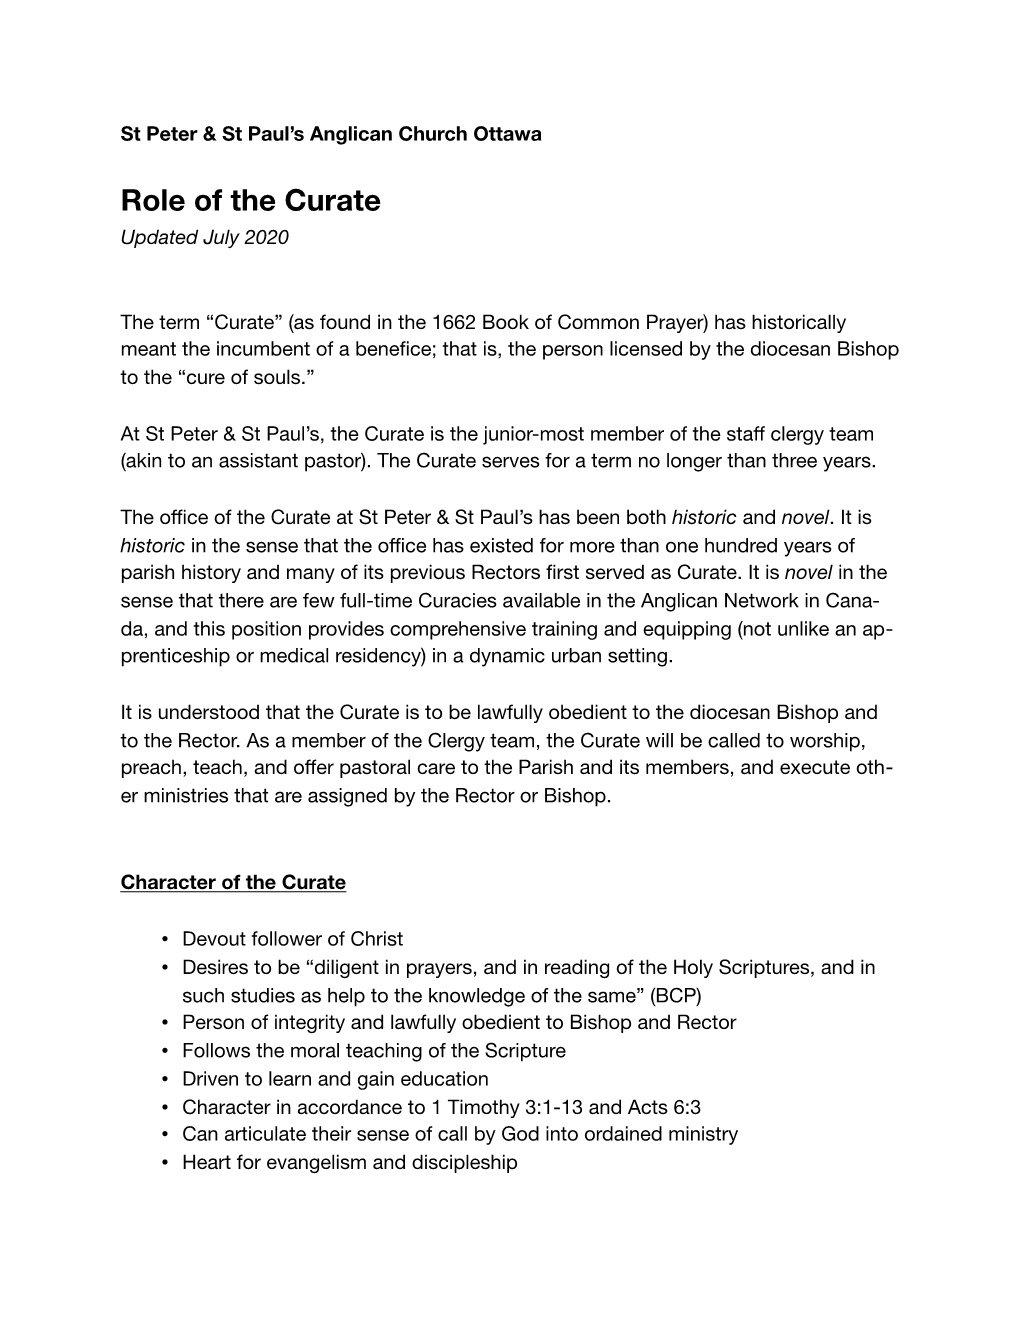 Role of the Curate July 2020